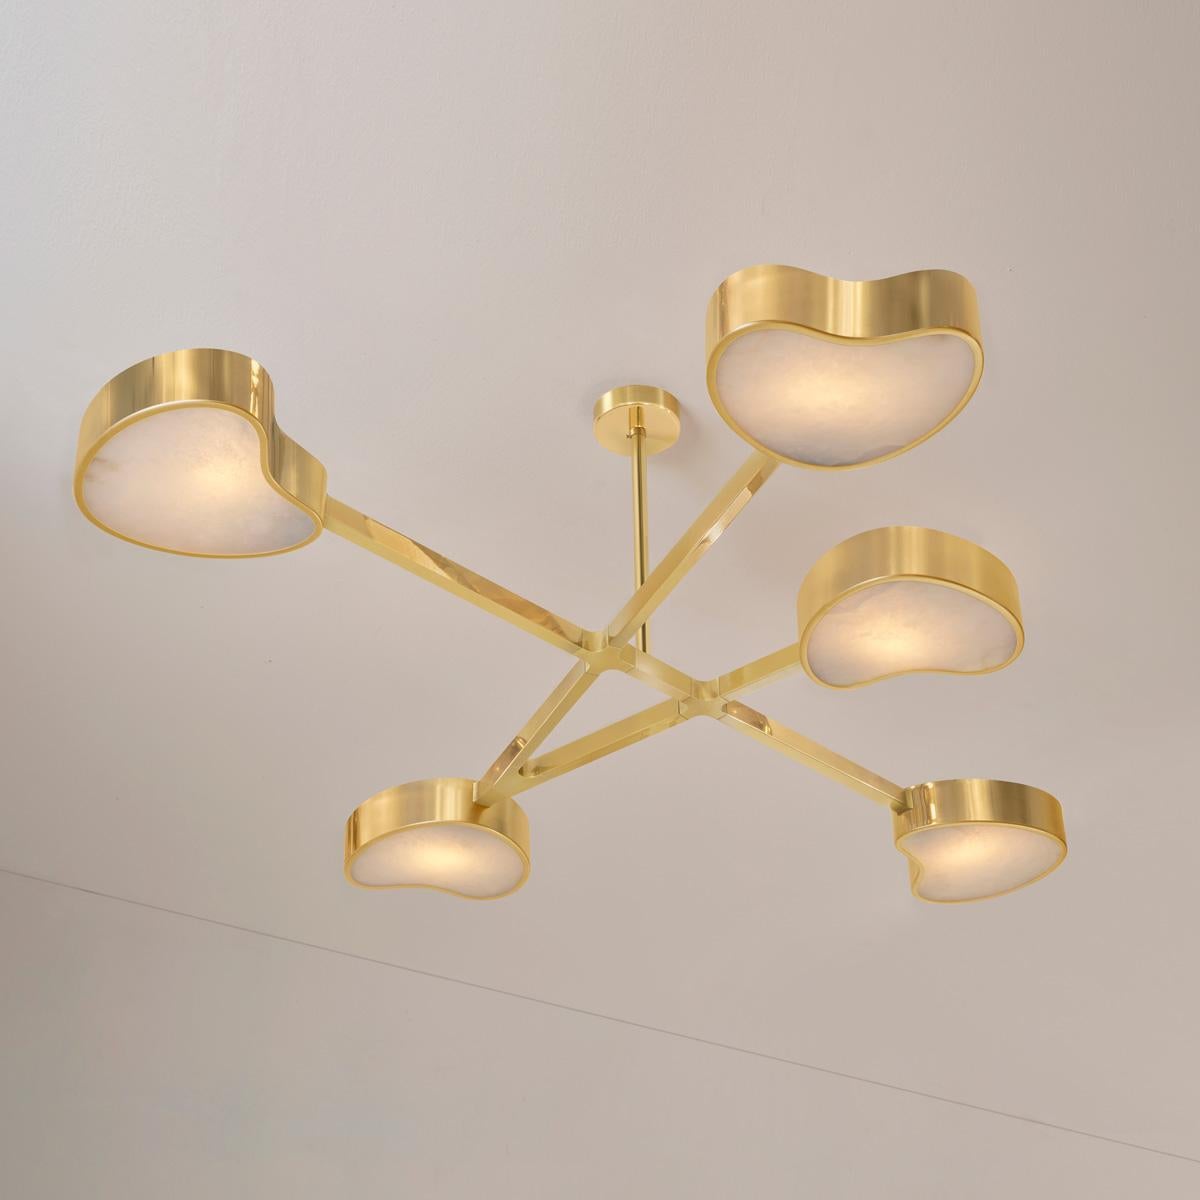 Italian Cuore N.5 Ceiling Light by Gaspare Asaro. Satin Brass and Sand White Finish For Sale